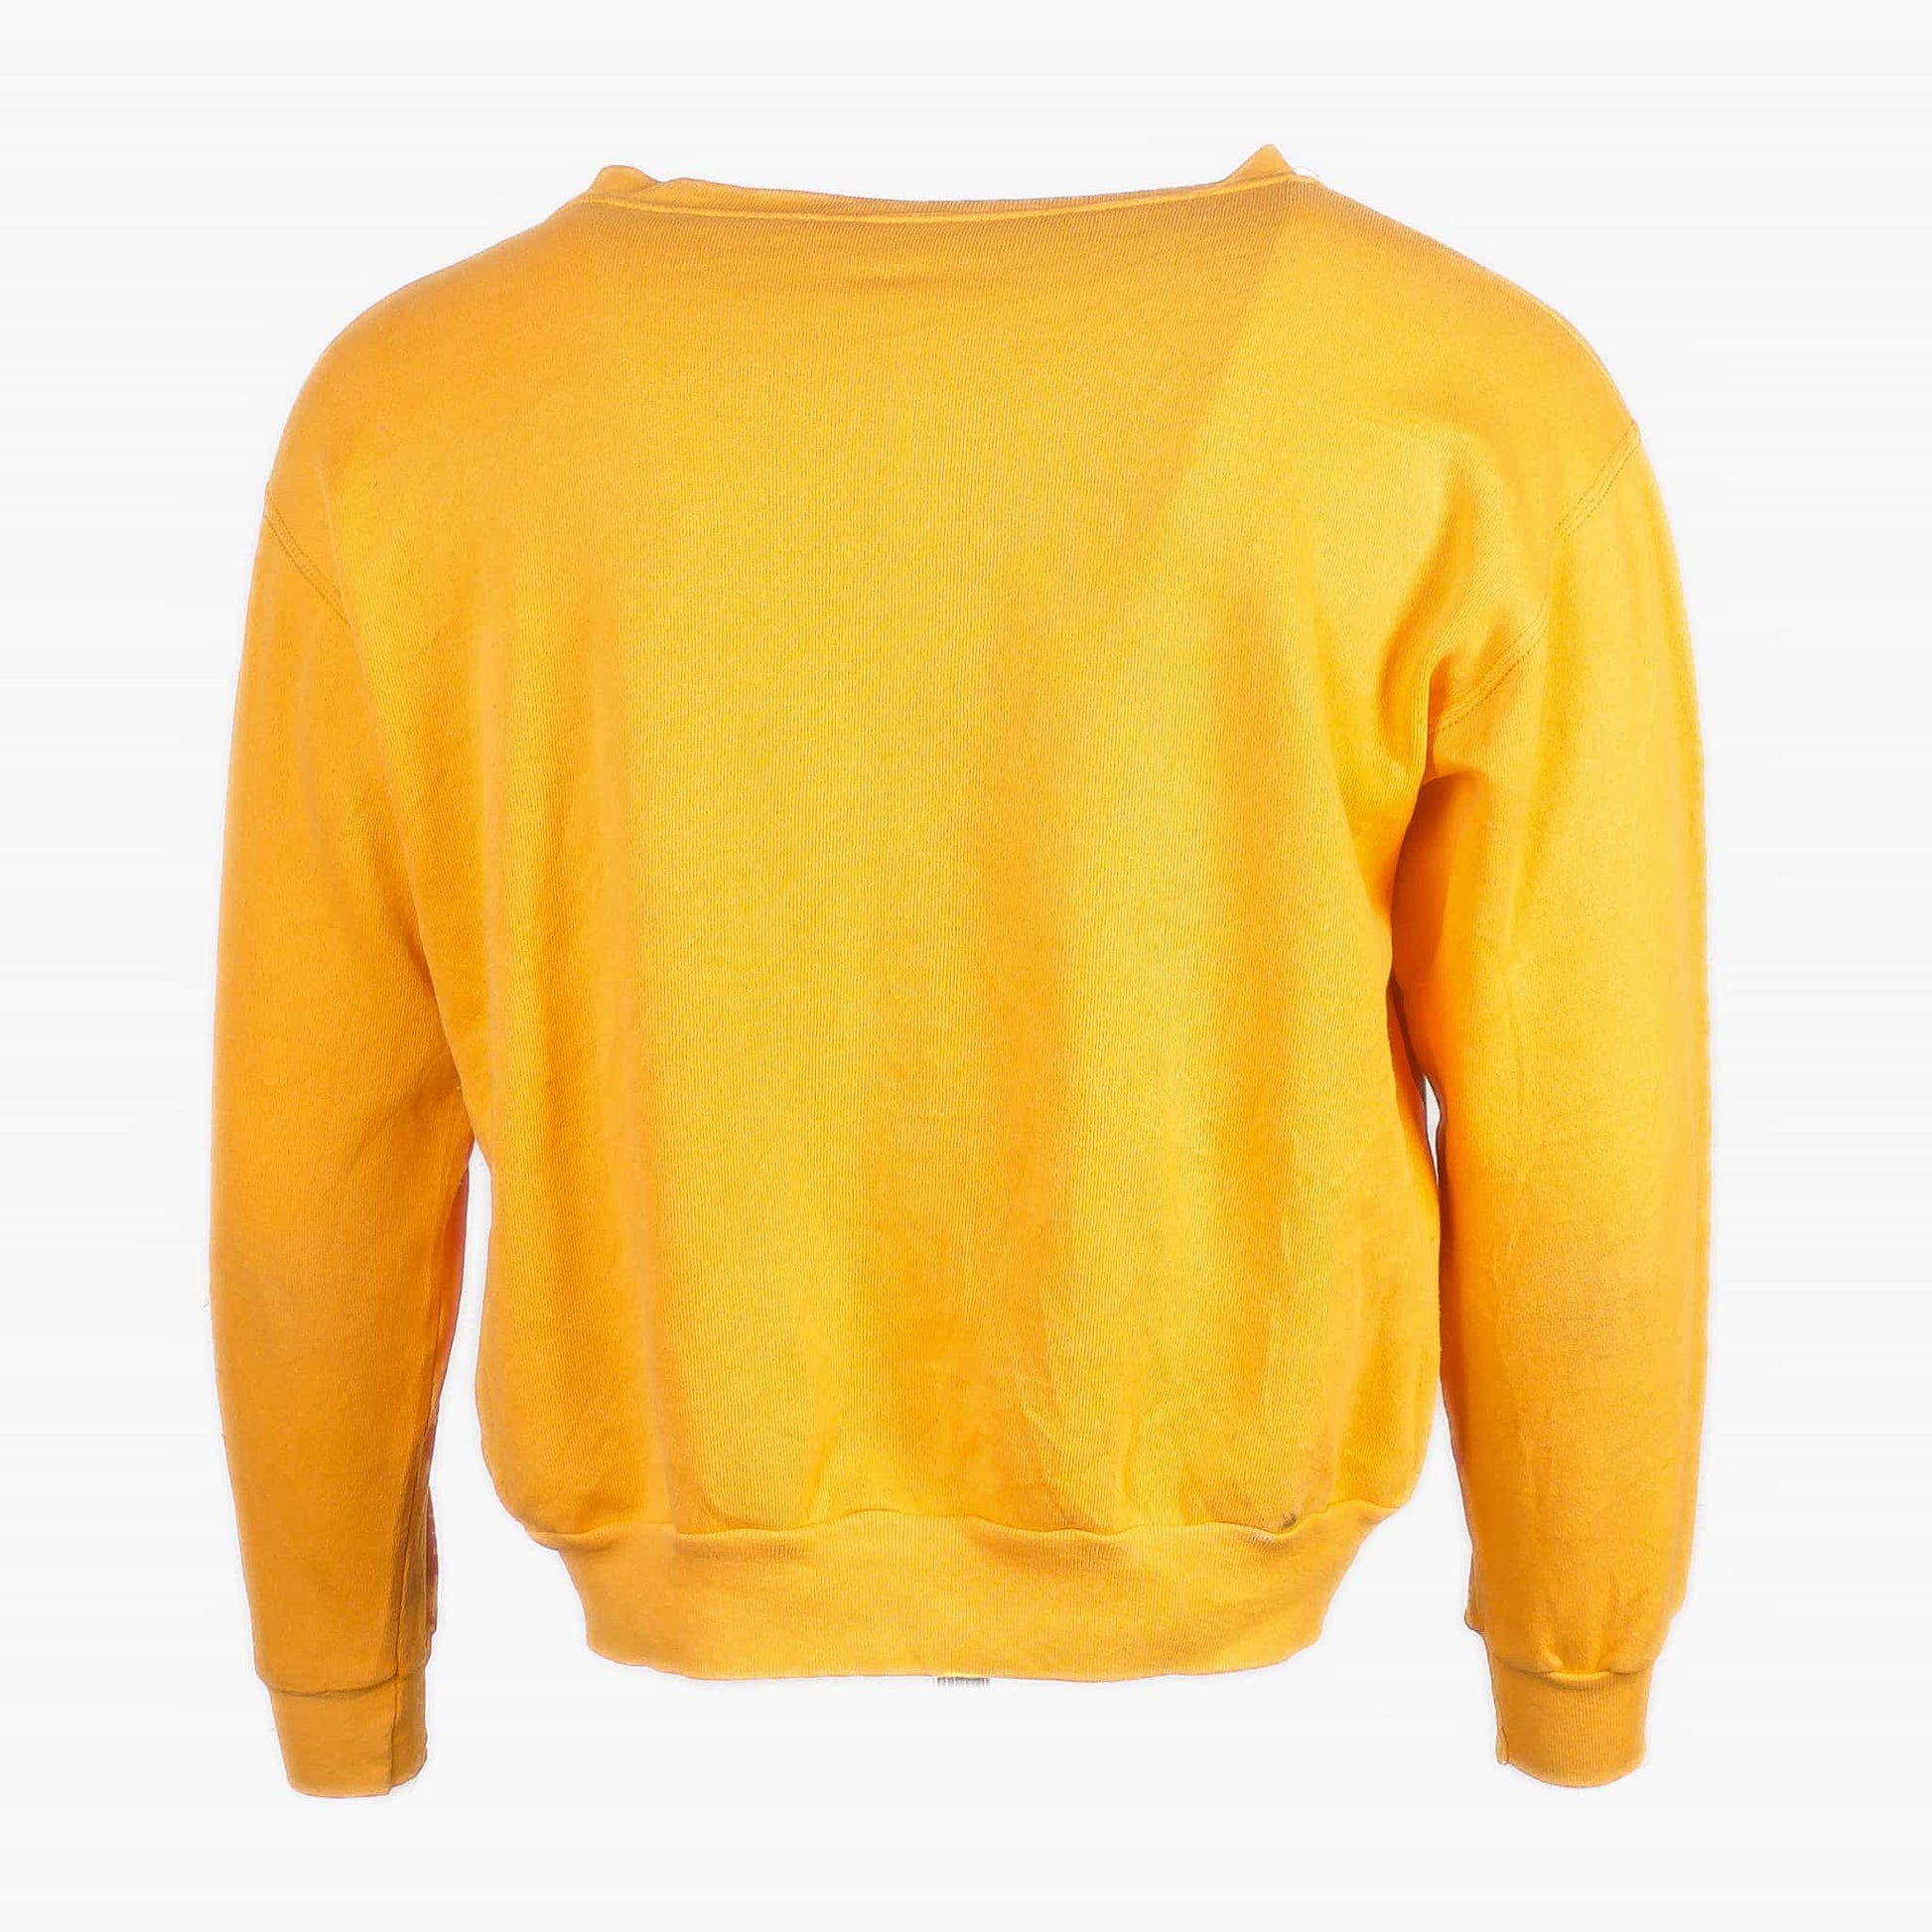 Vintage Tennessee Graphic Sweatshirt - Yellow - American Madness